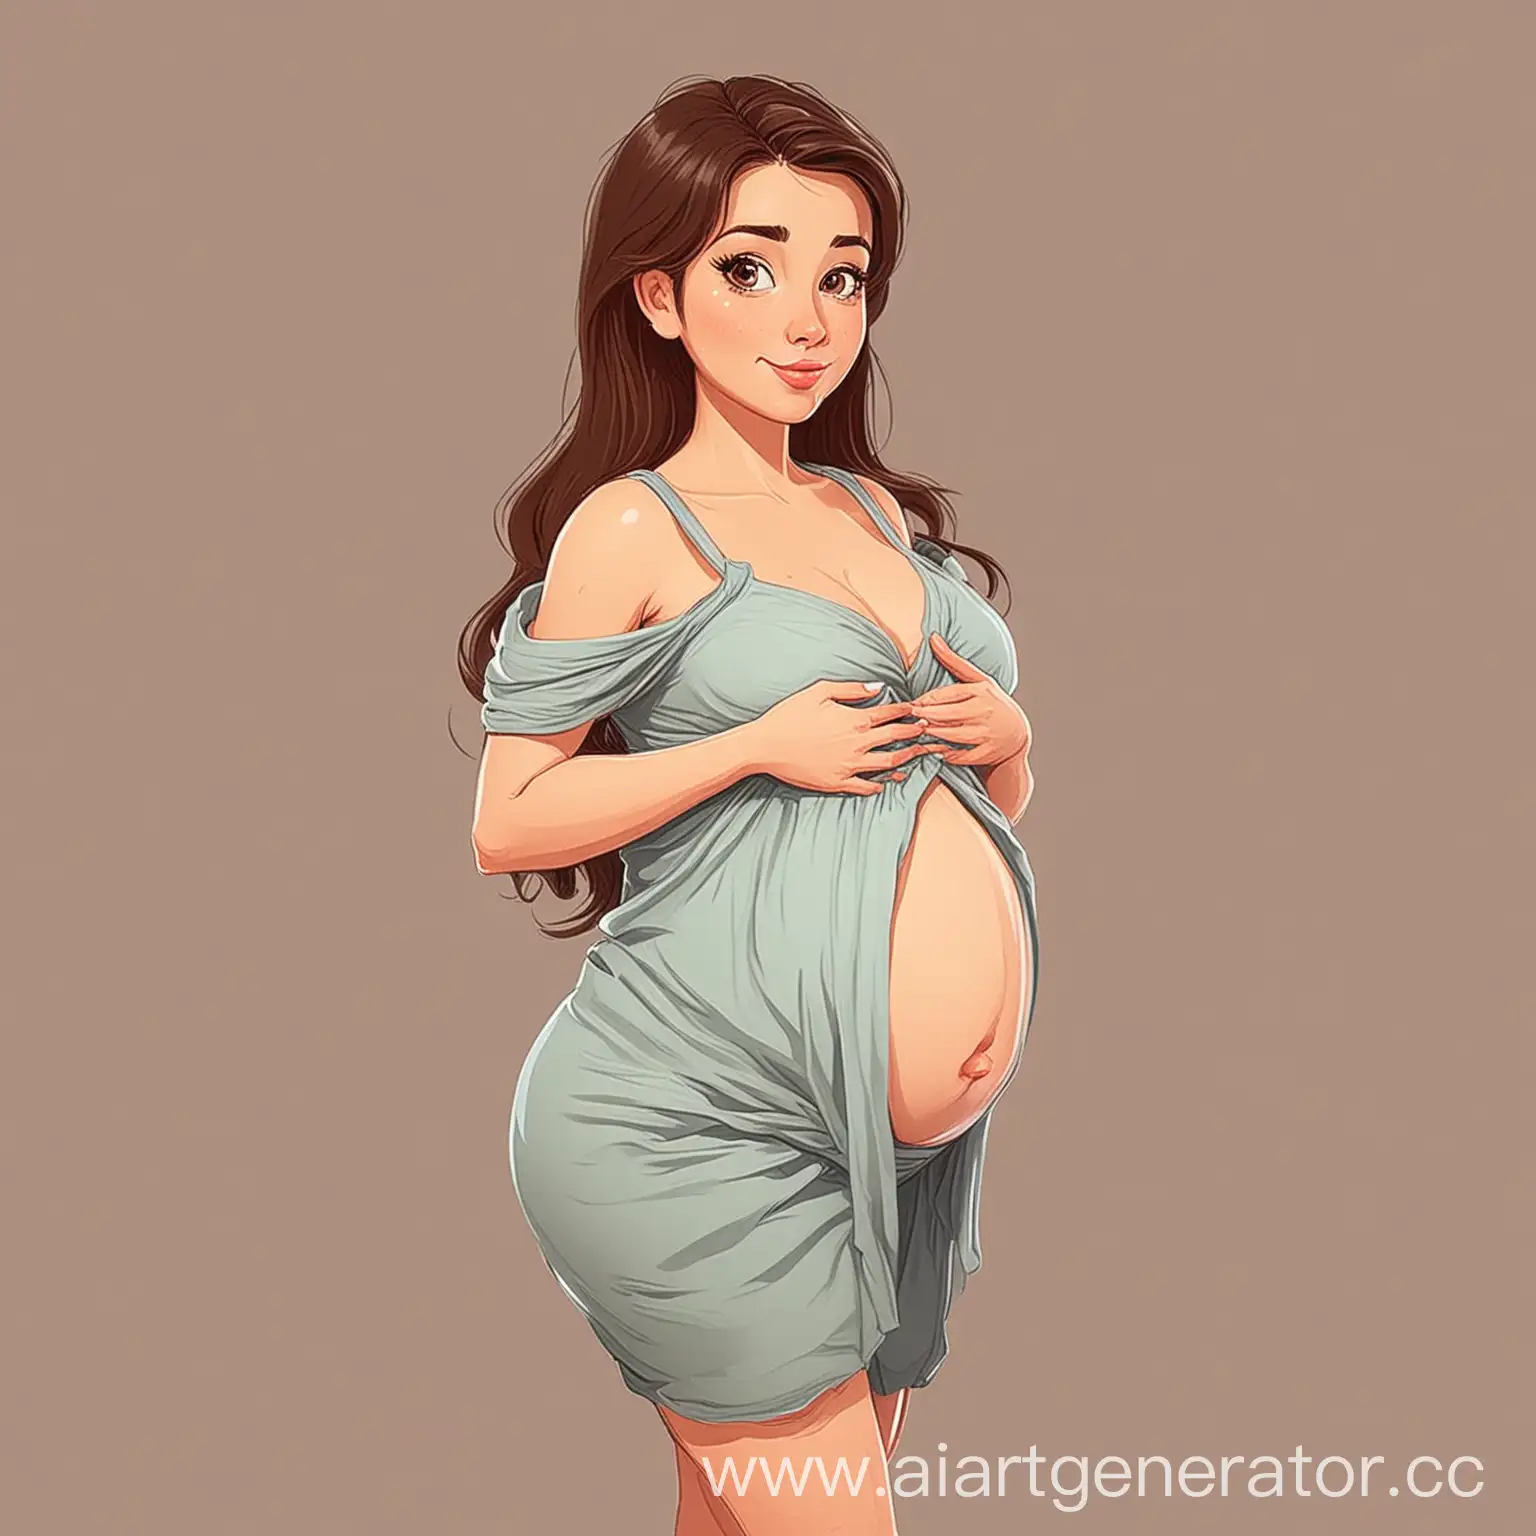 Expecting-Mother-in-Cheerful-Cartoon-Style